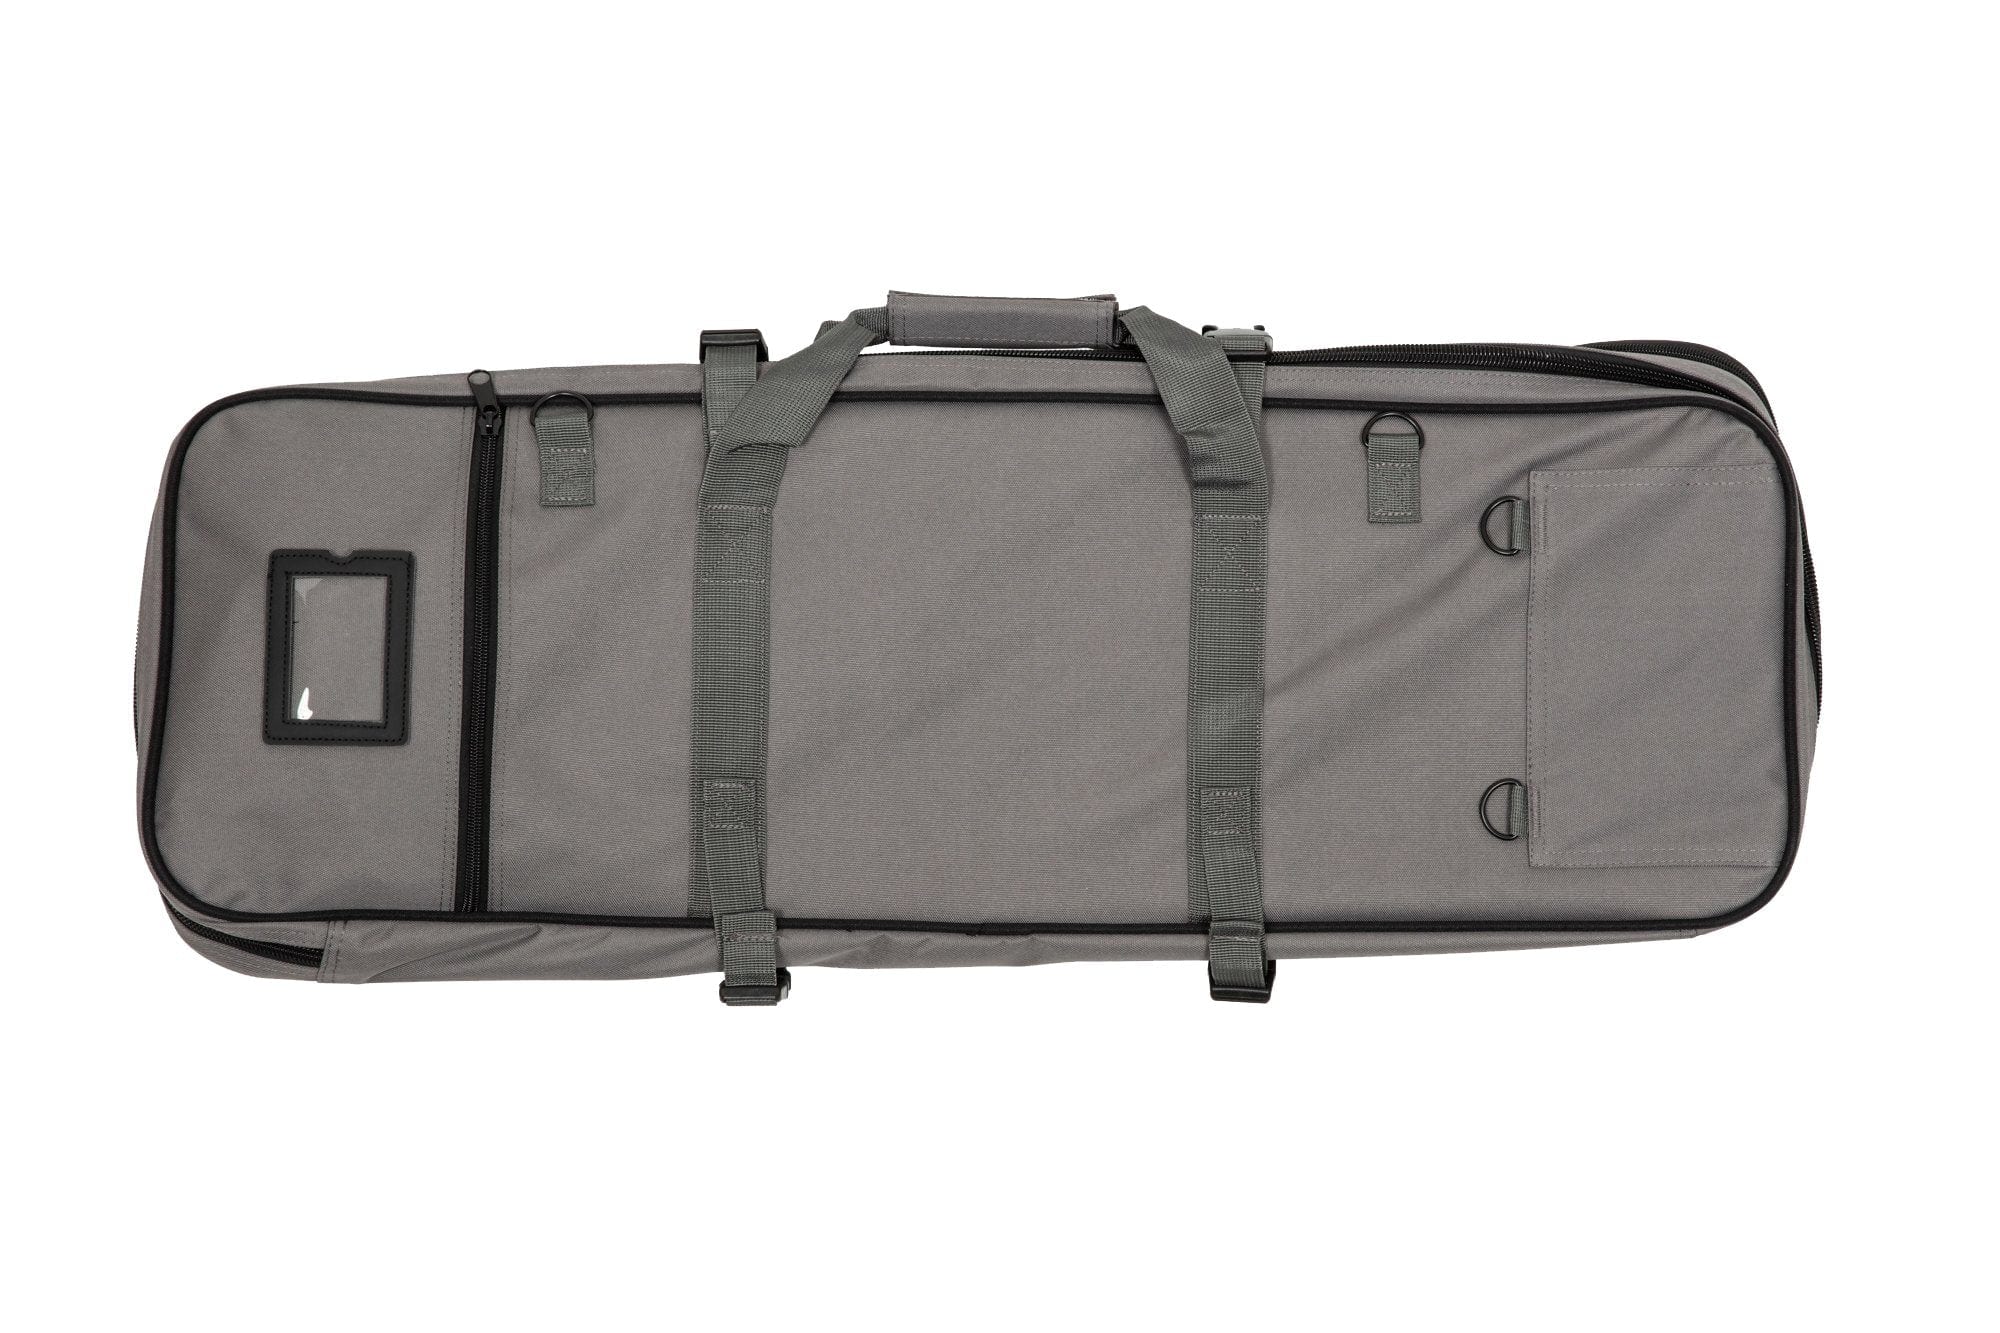 Gun Bag V2 84cm - Chaos Grey by Specna Arms on Airsoft Mania Europe